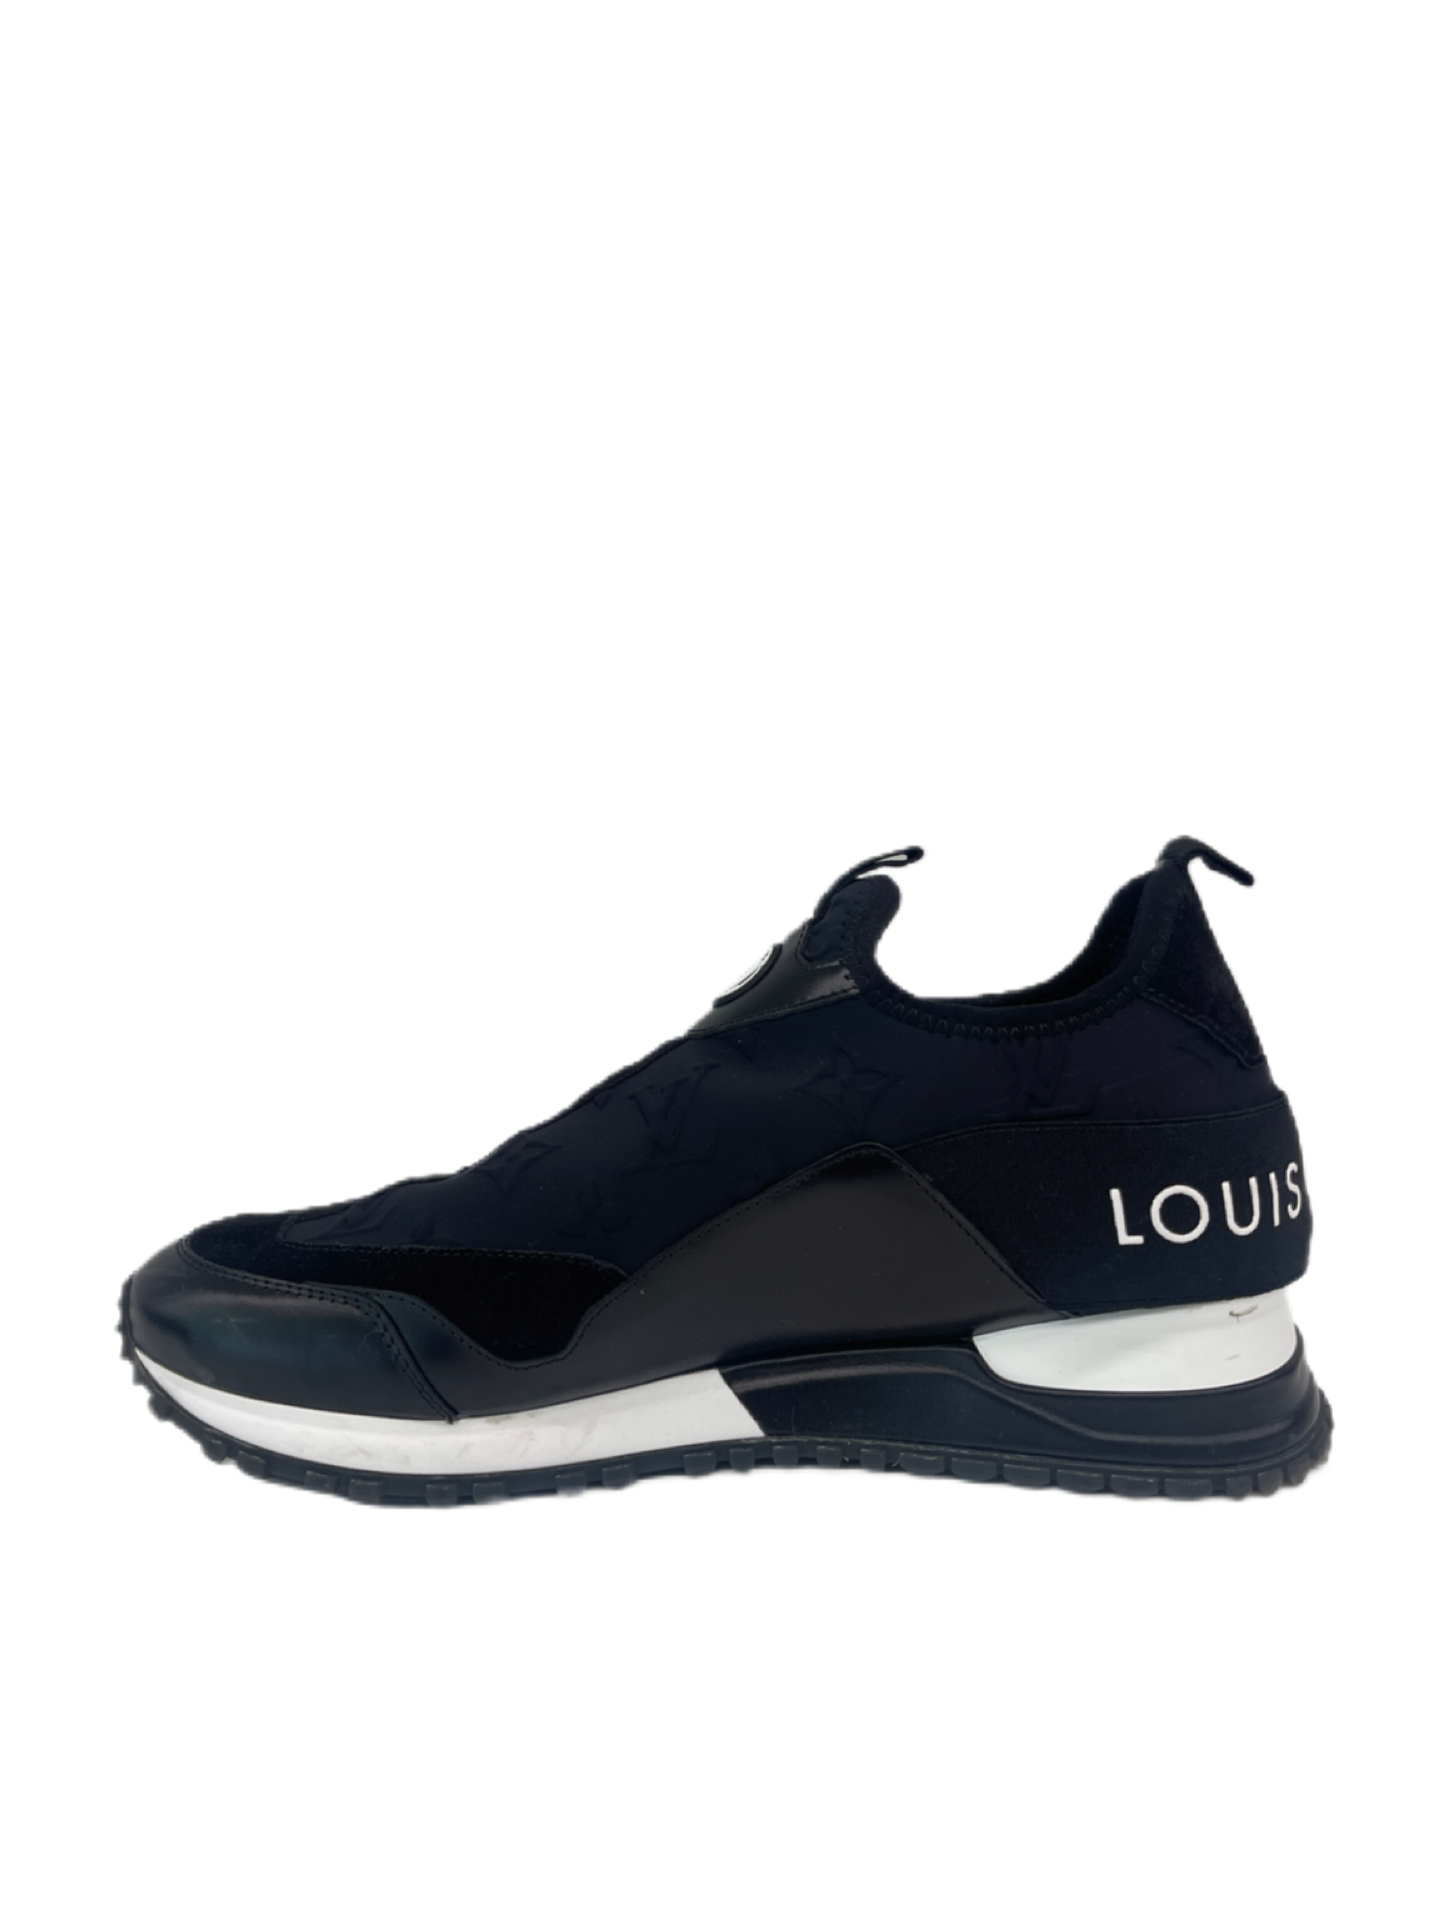 Louis Vuitton Black Runway Cloth Trainers. Size: 39